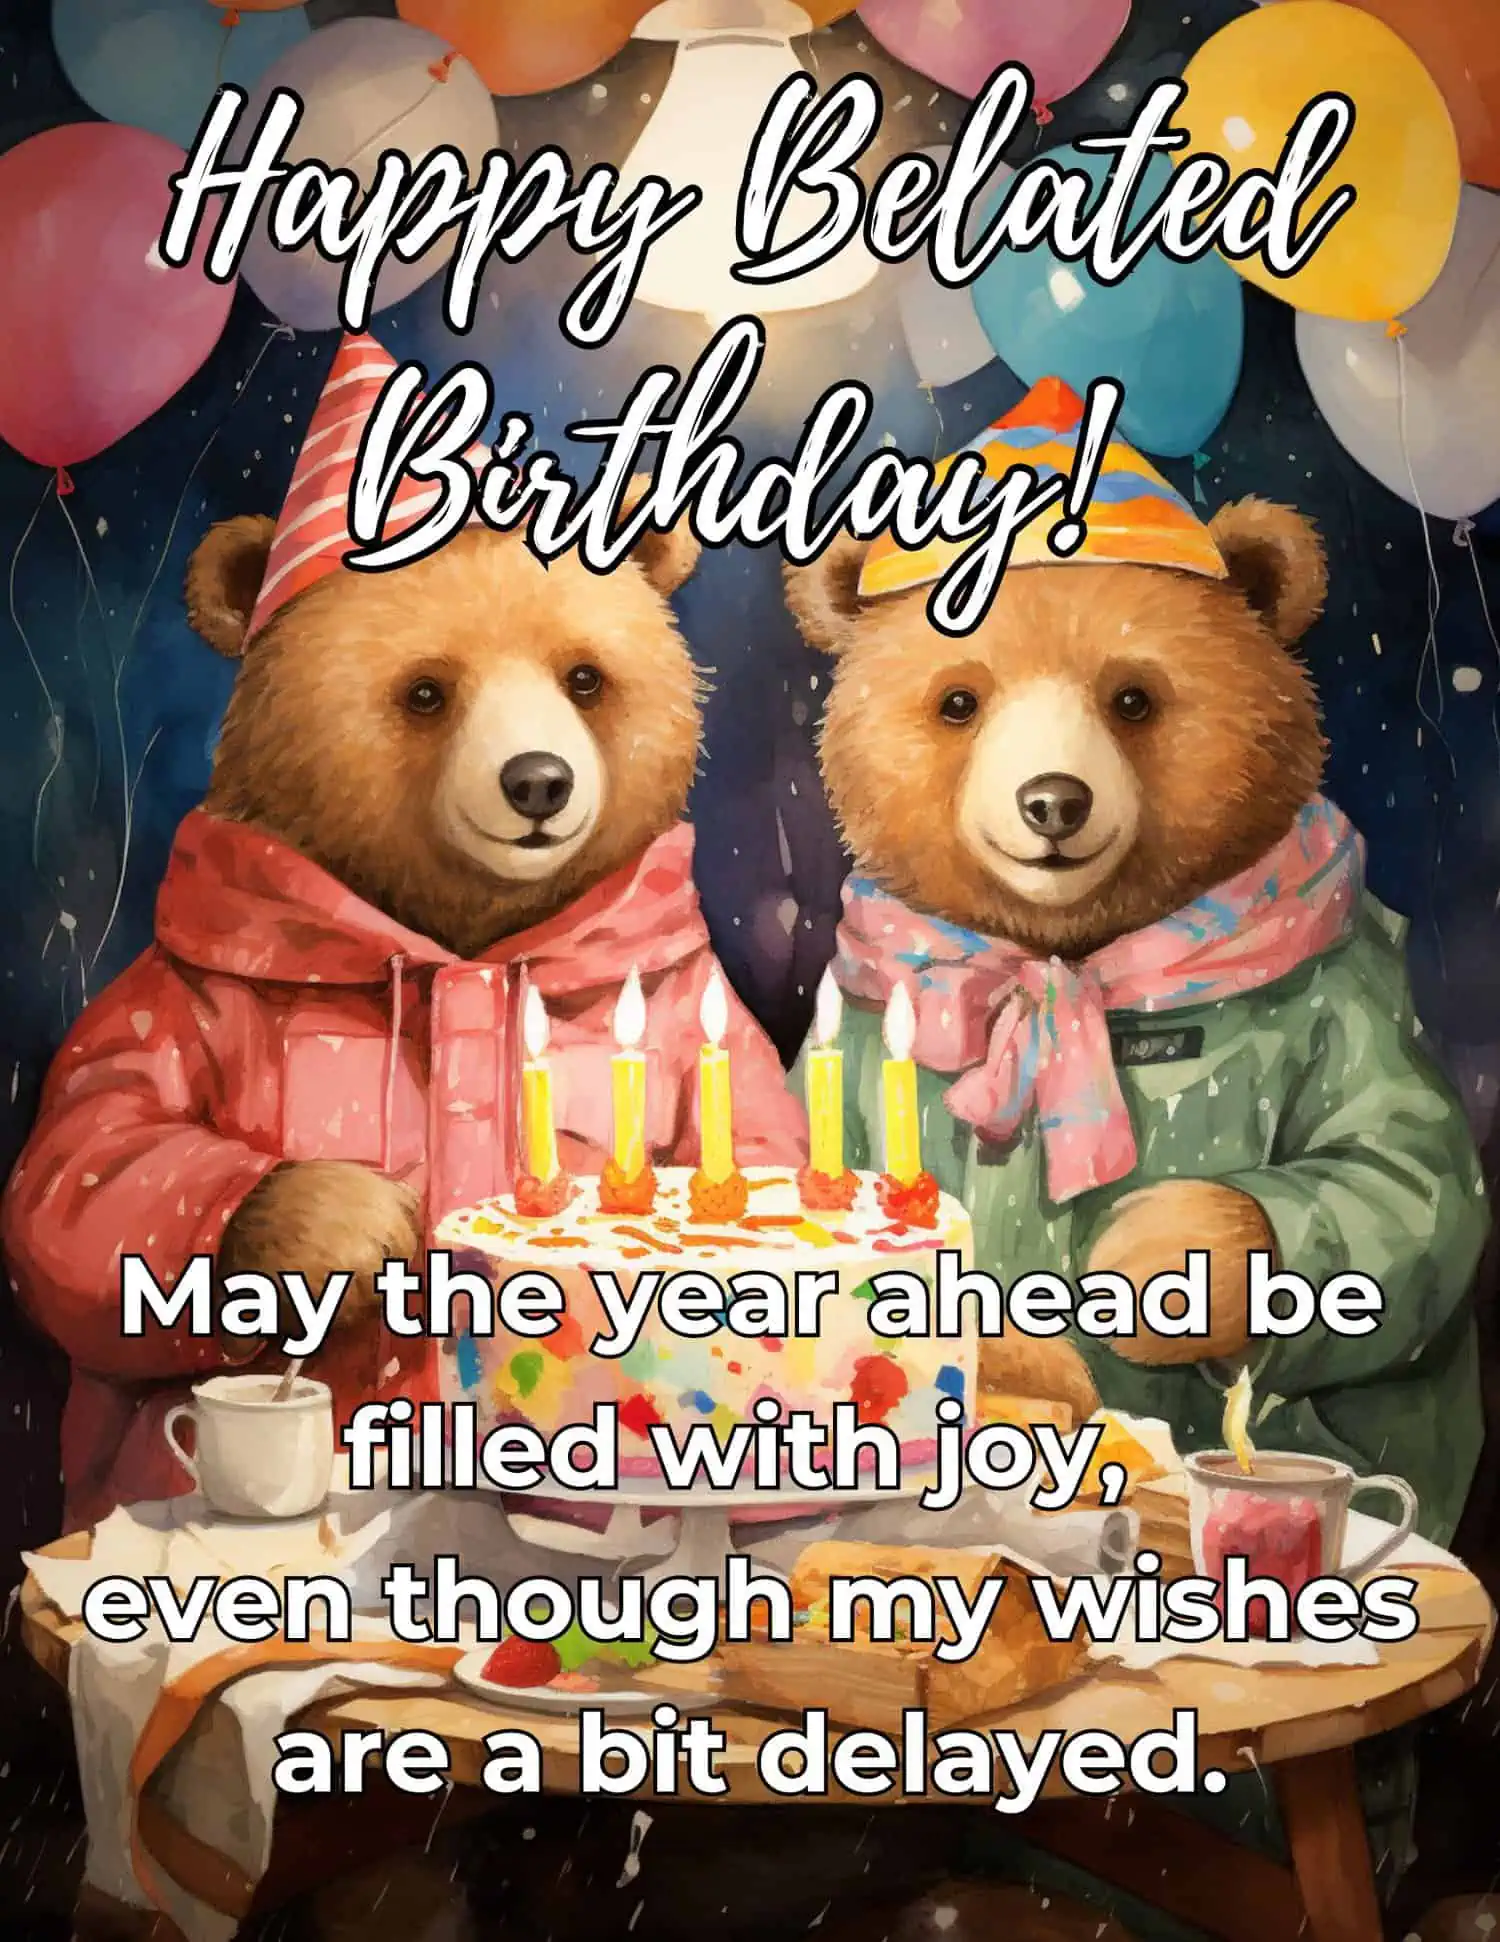 A collection of sincere and heartfelt belated birthday wishes, perfect for expressing genuine feelings and making up for a missed birthday, ensuring the recipient feels valued and remembered.